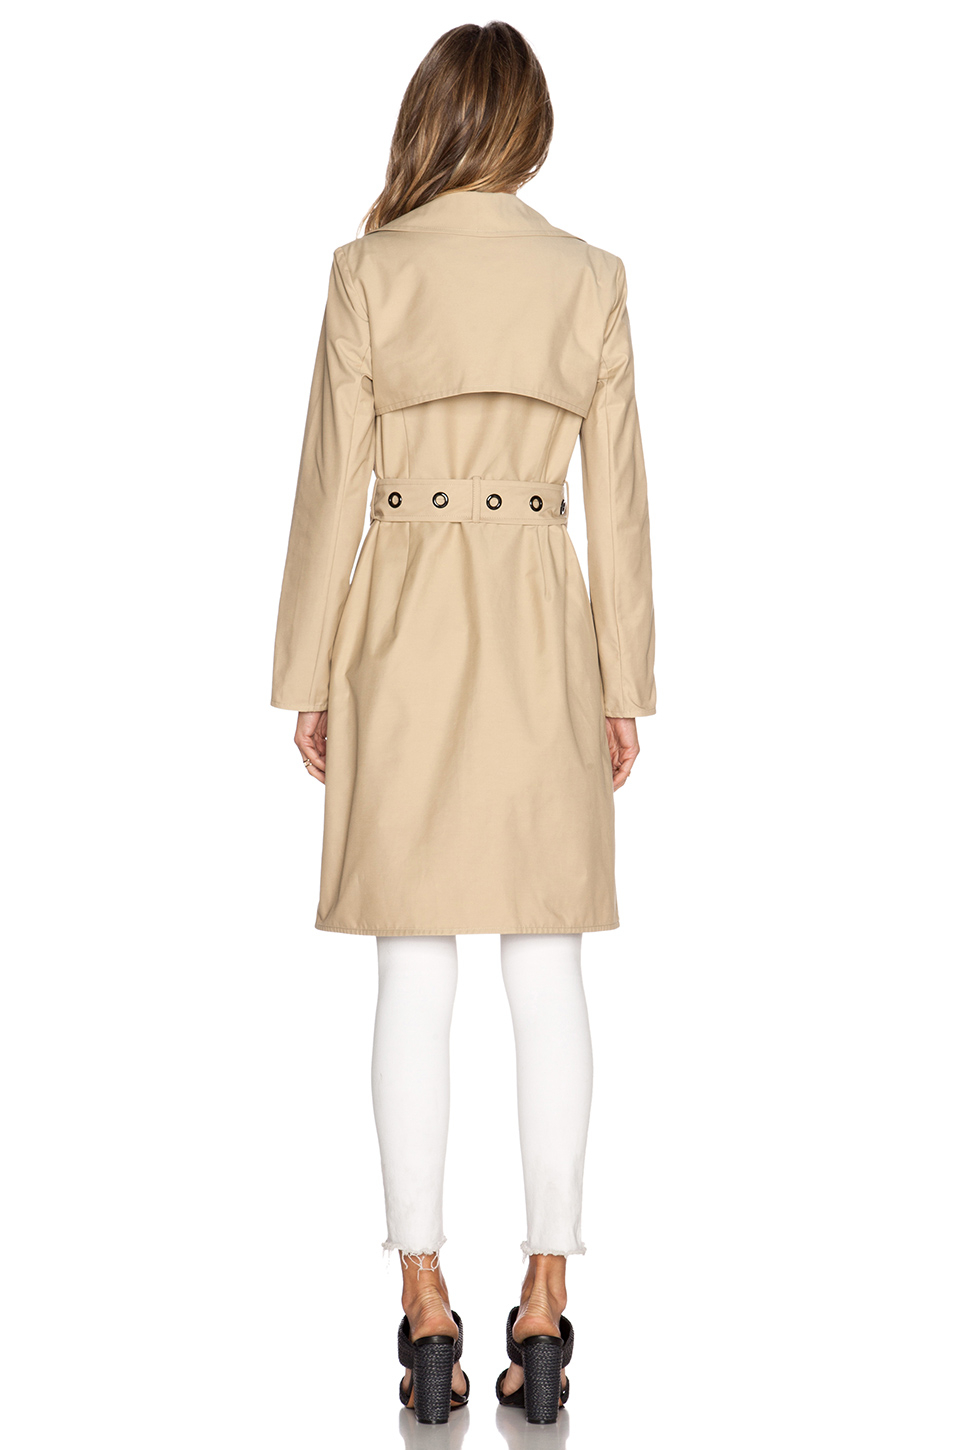 Lyst - Milly Waterproof Trench Coat in Natural